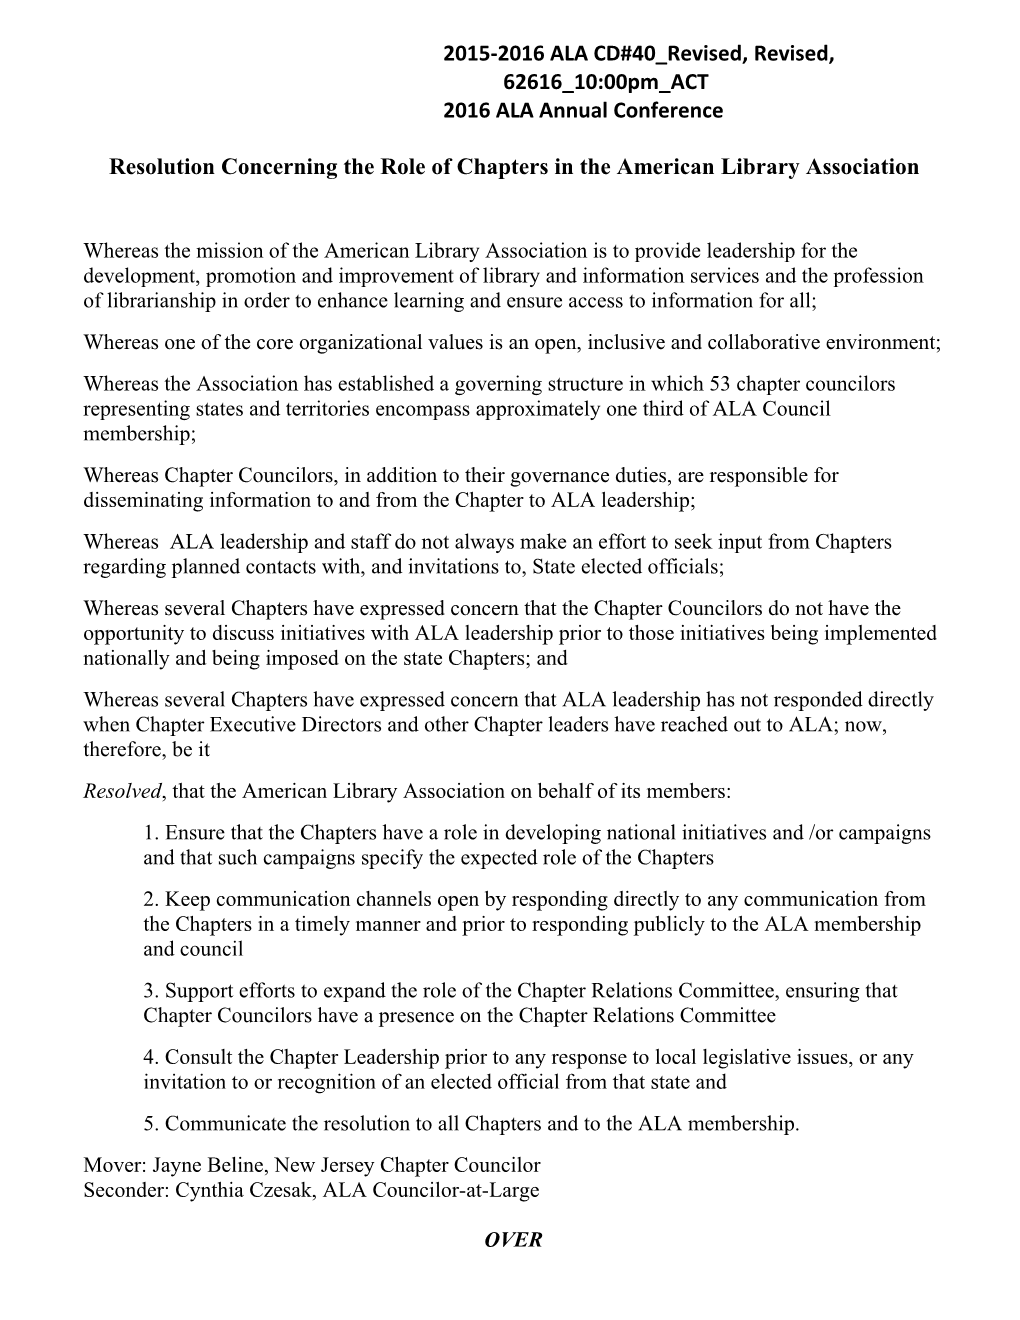 Resolution Concerning the Role of Chapters in the American Library Association